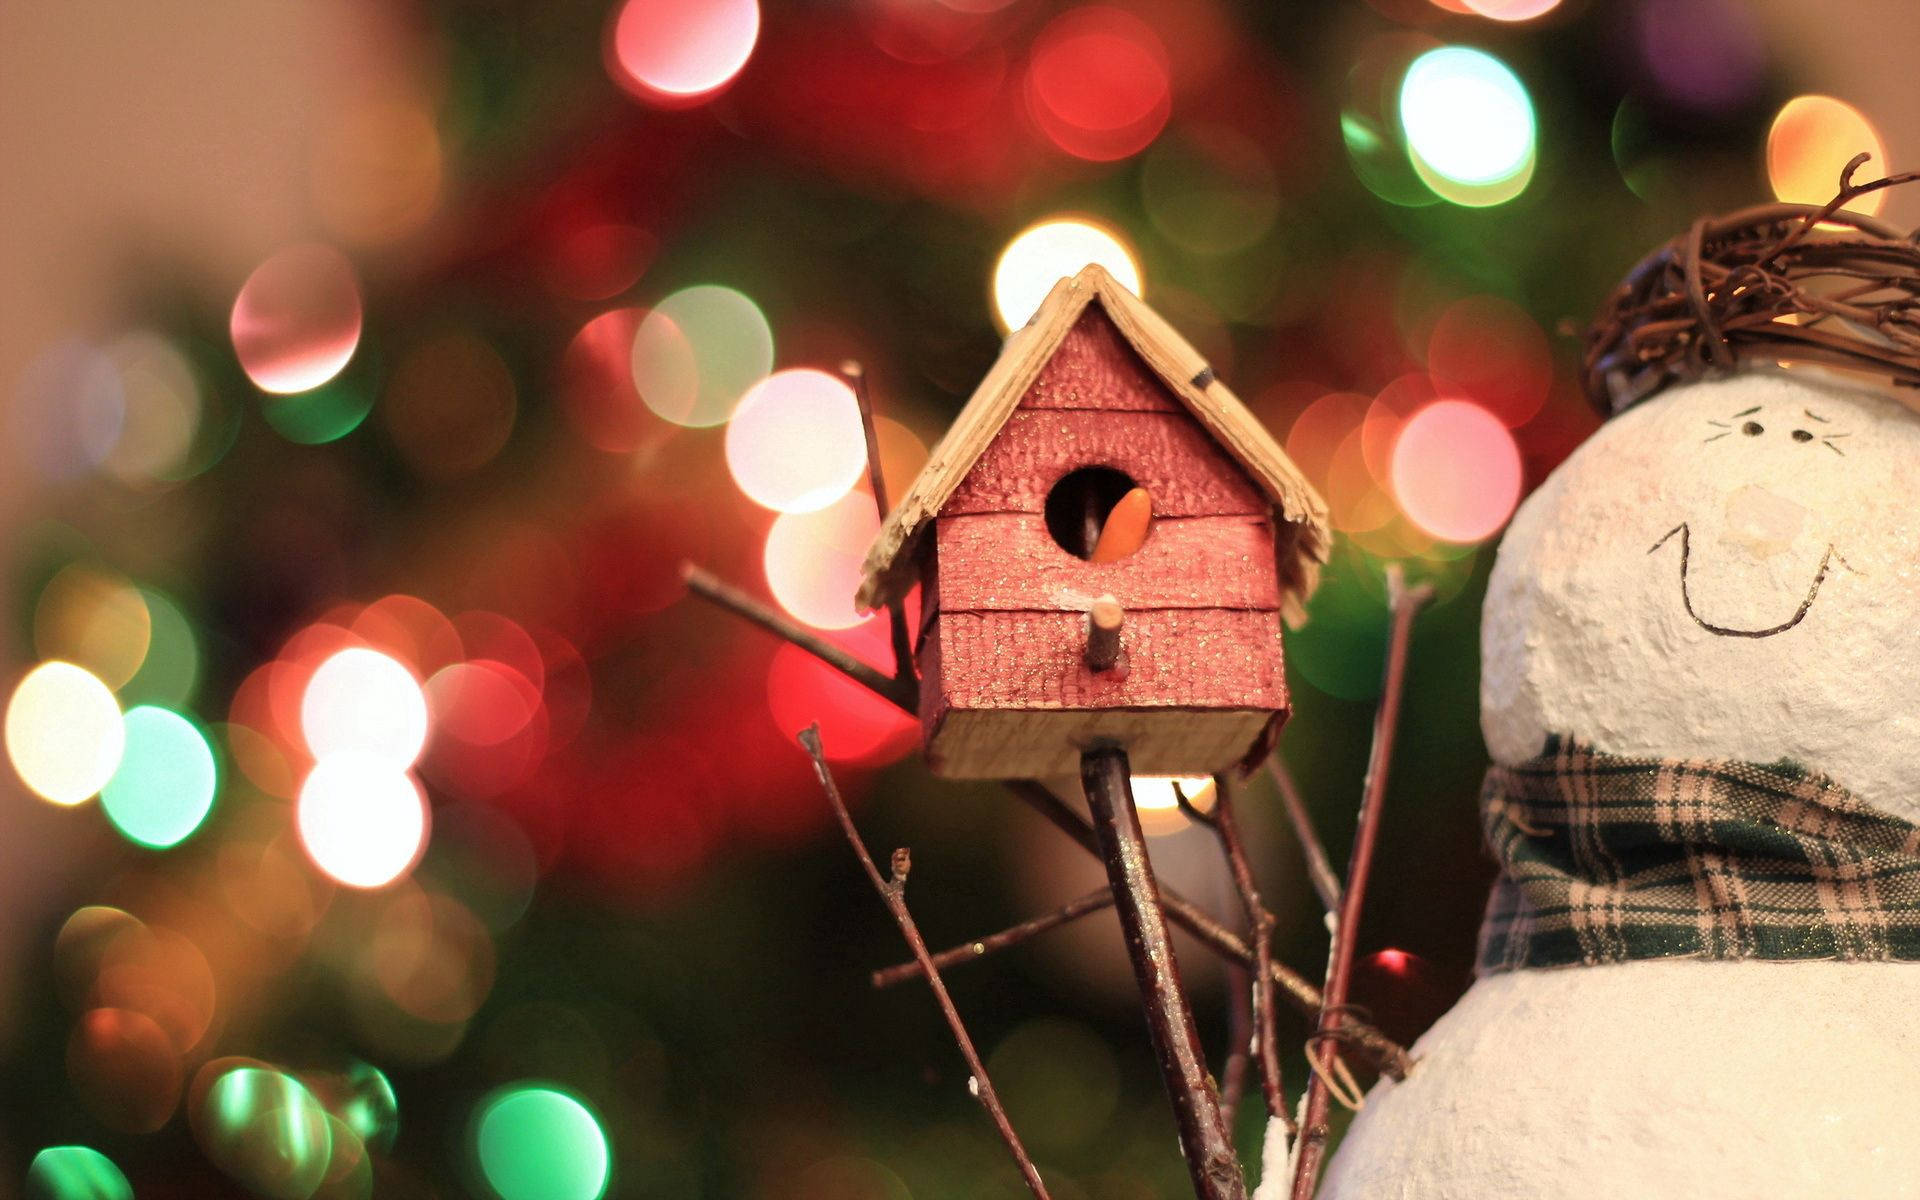 Spread the winter cheer with this beautifully crafted birdhouse, complete with a snowman. Wallpaper